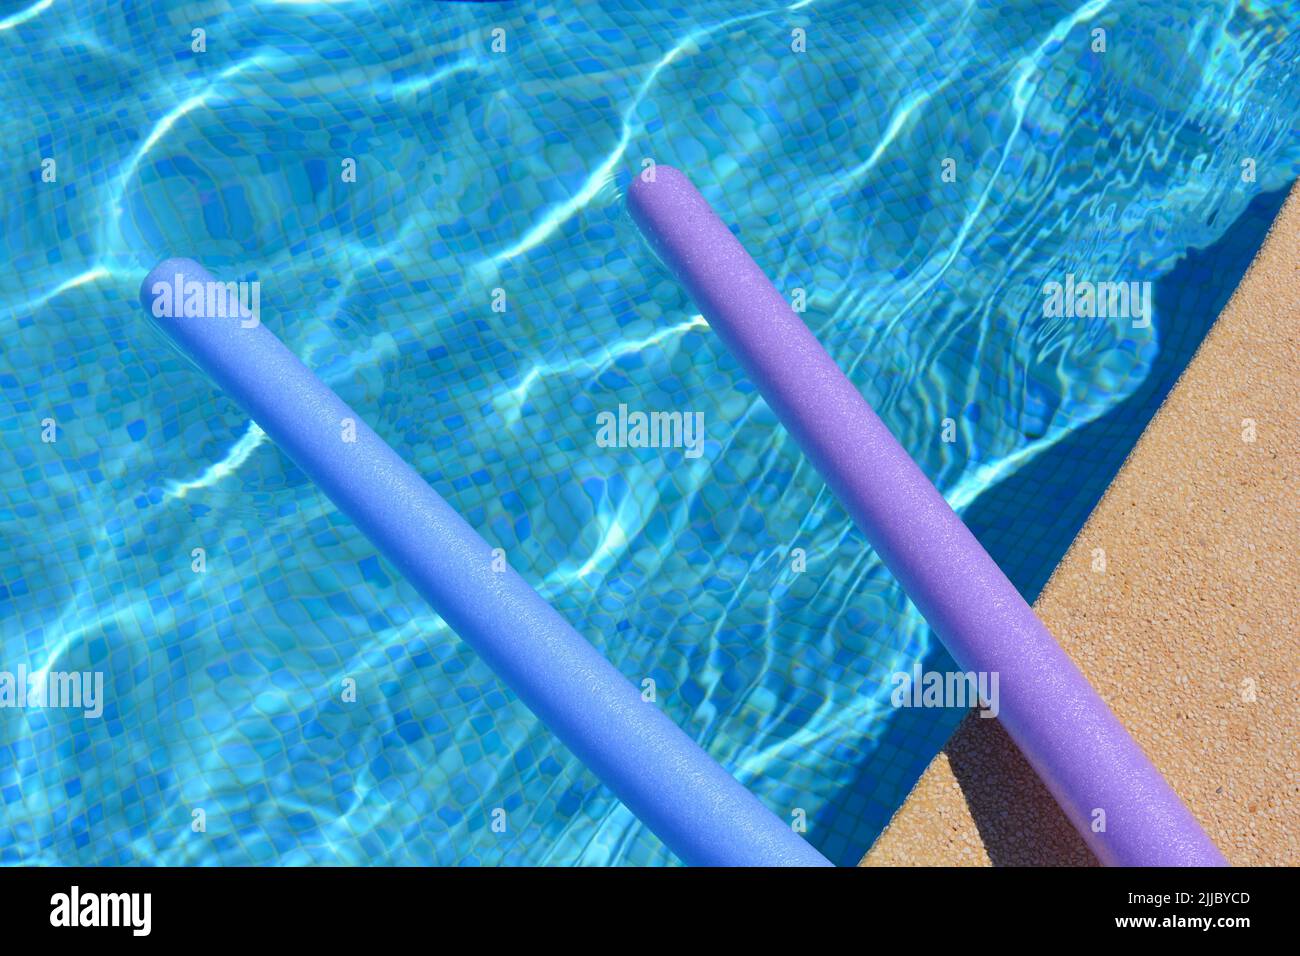 Summer vibes. Purple and blue swim noodles floating  at side of swimming pool Stock Photo